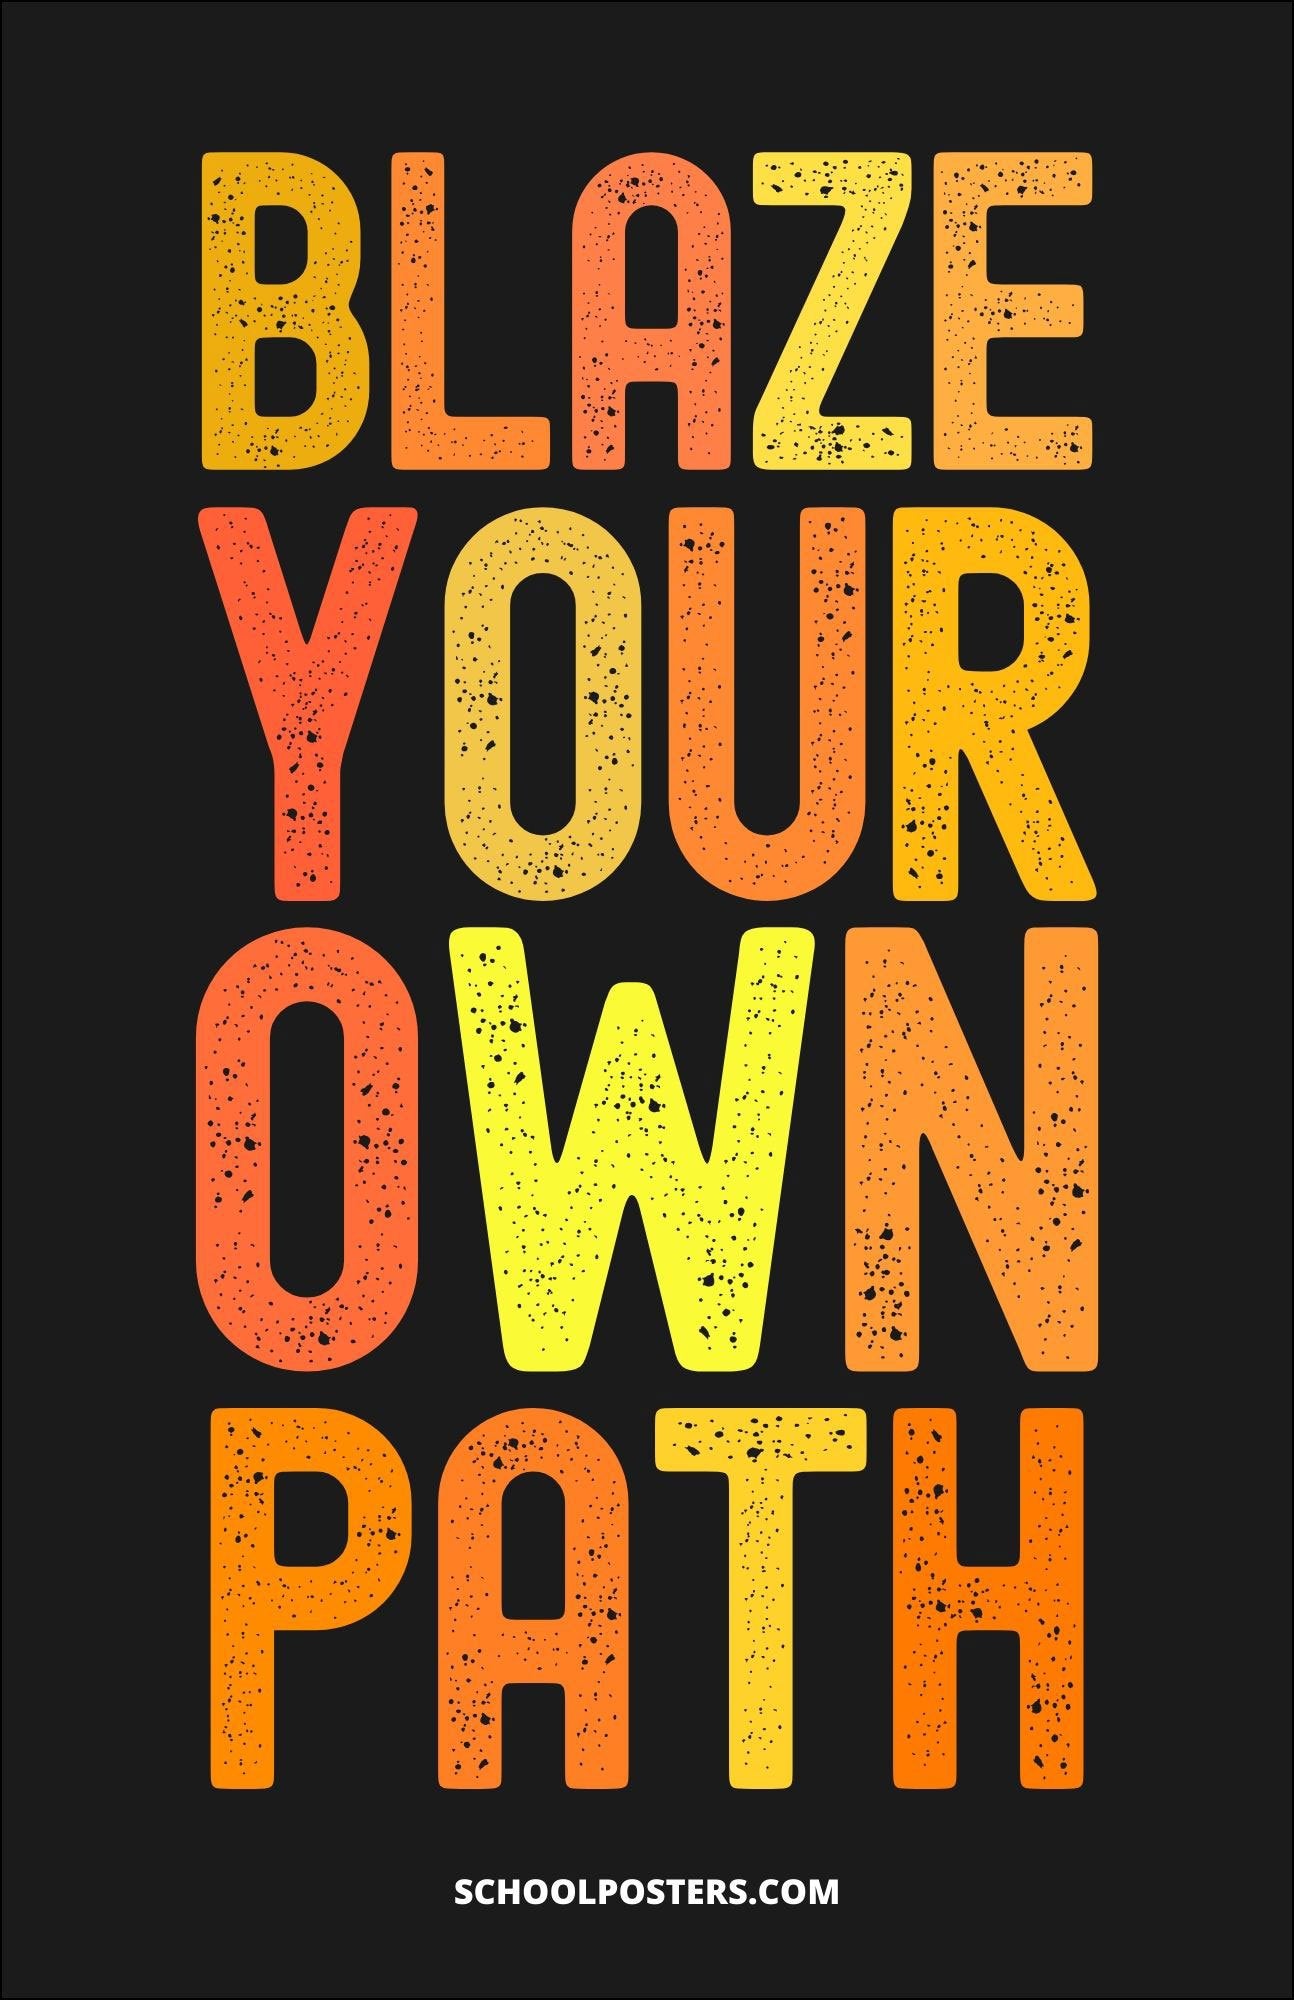 Blaze Your Own Path Poster